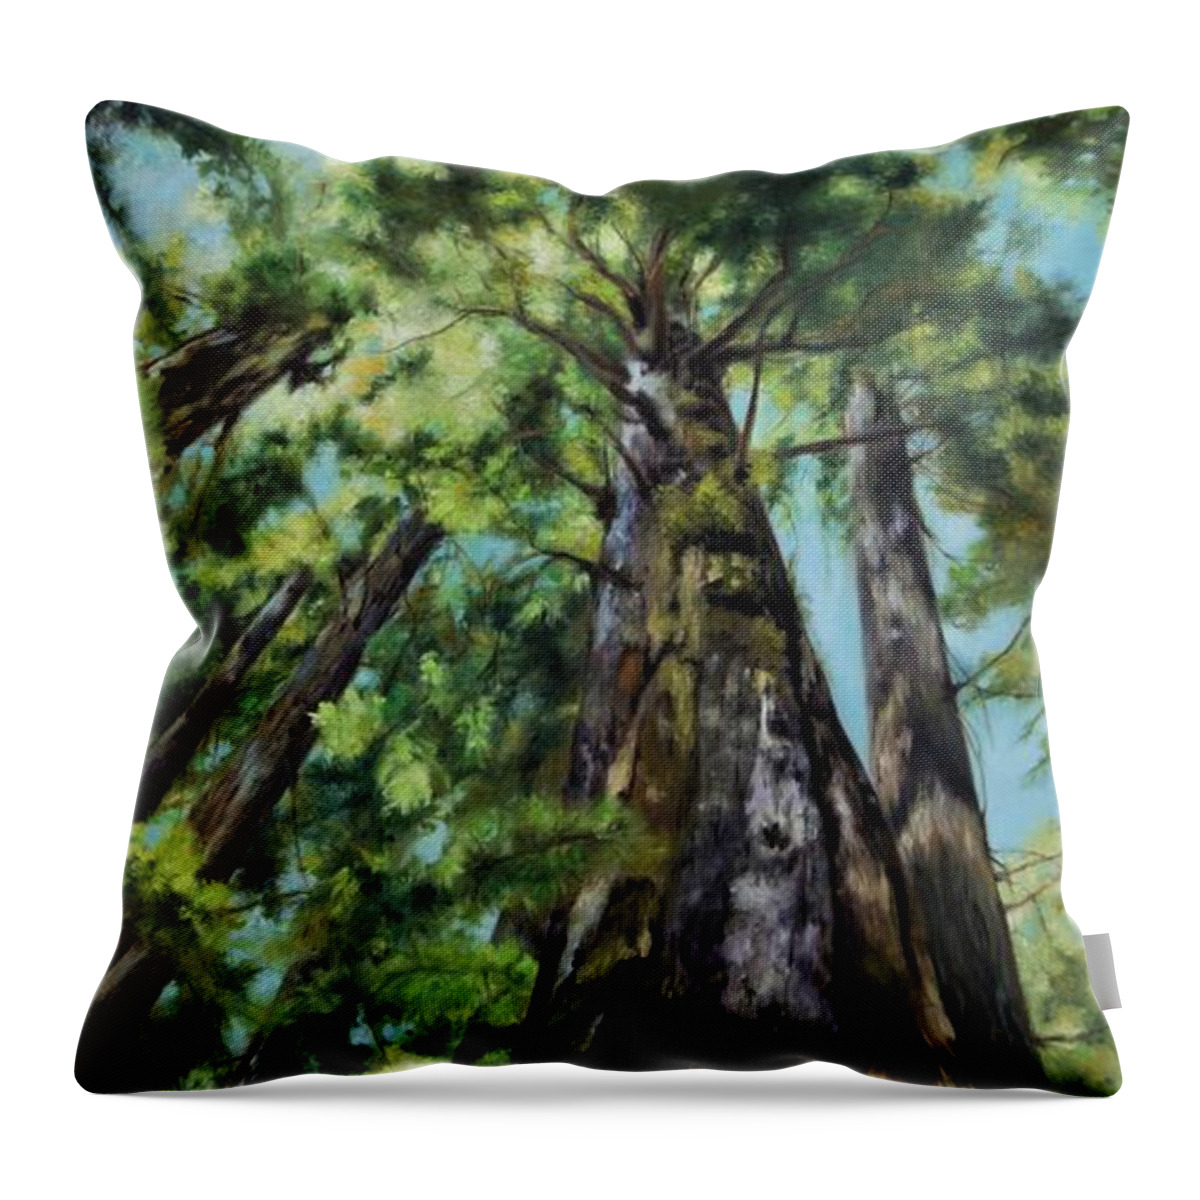 Forest Throw Pillow featuring the painting Reaching for the Light by Lori Brackett